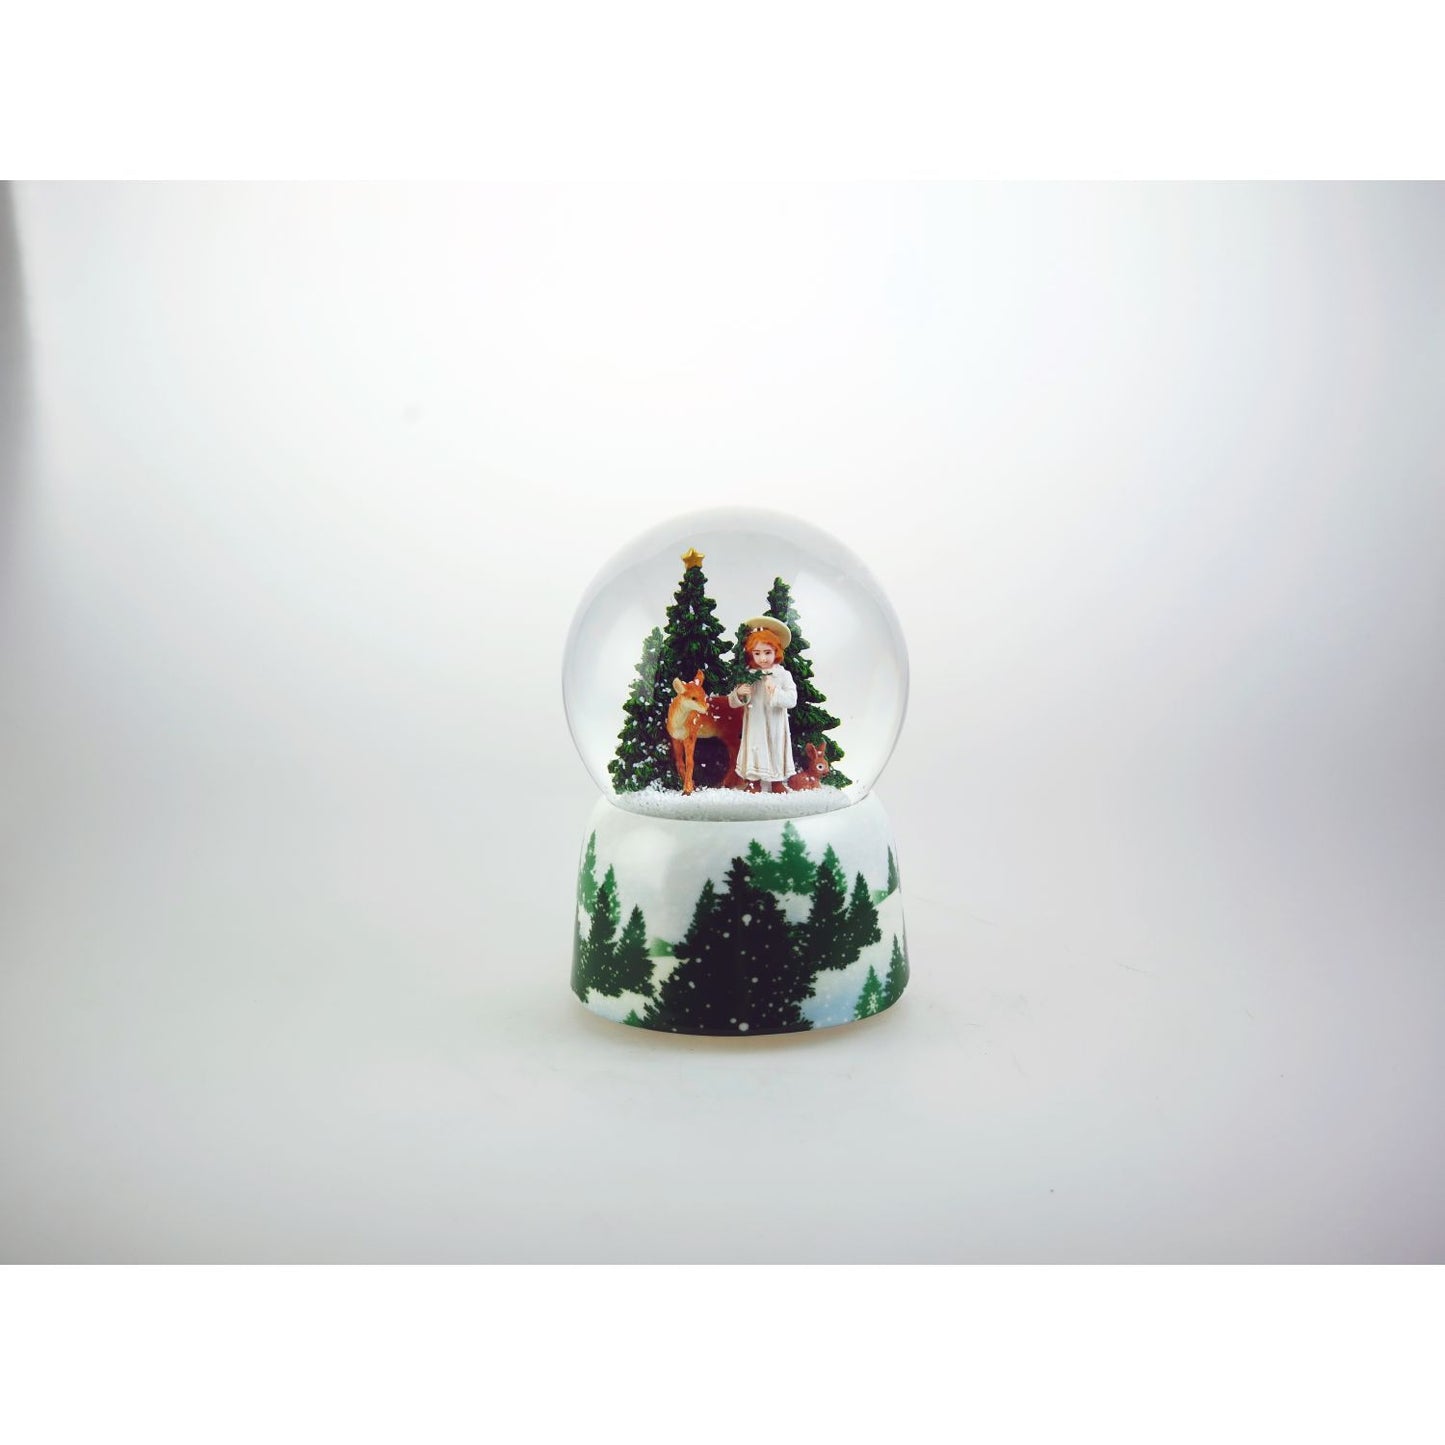 Musicbox Kingdom 3.9" Snow Globe With The Christkind